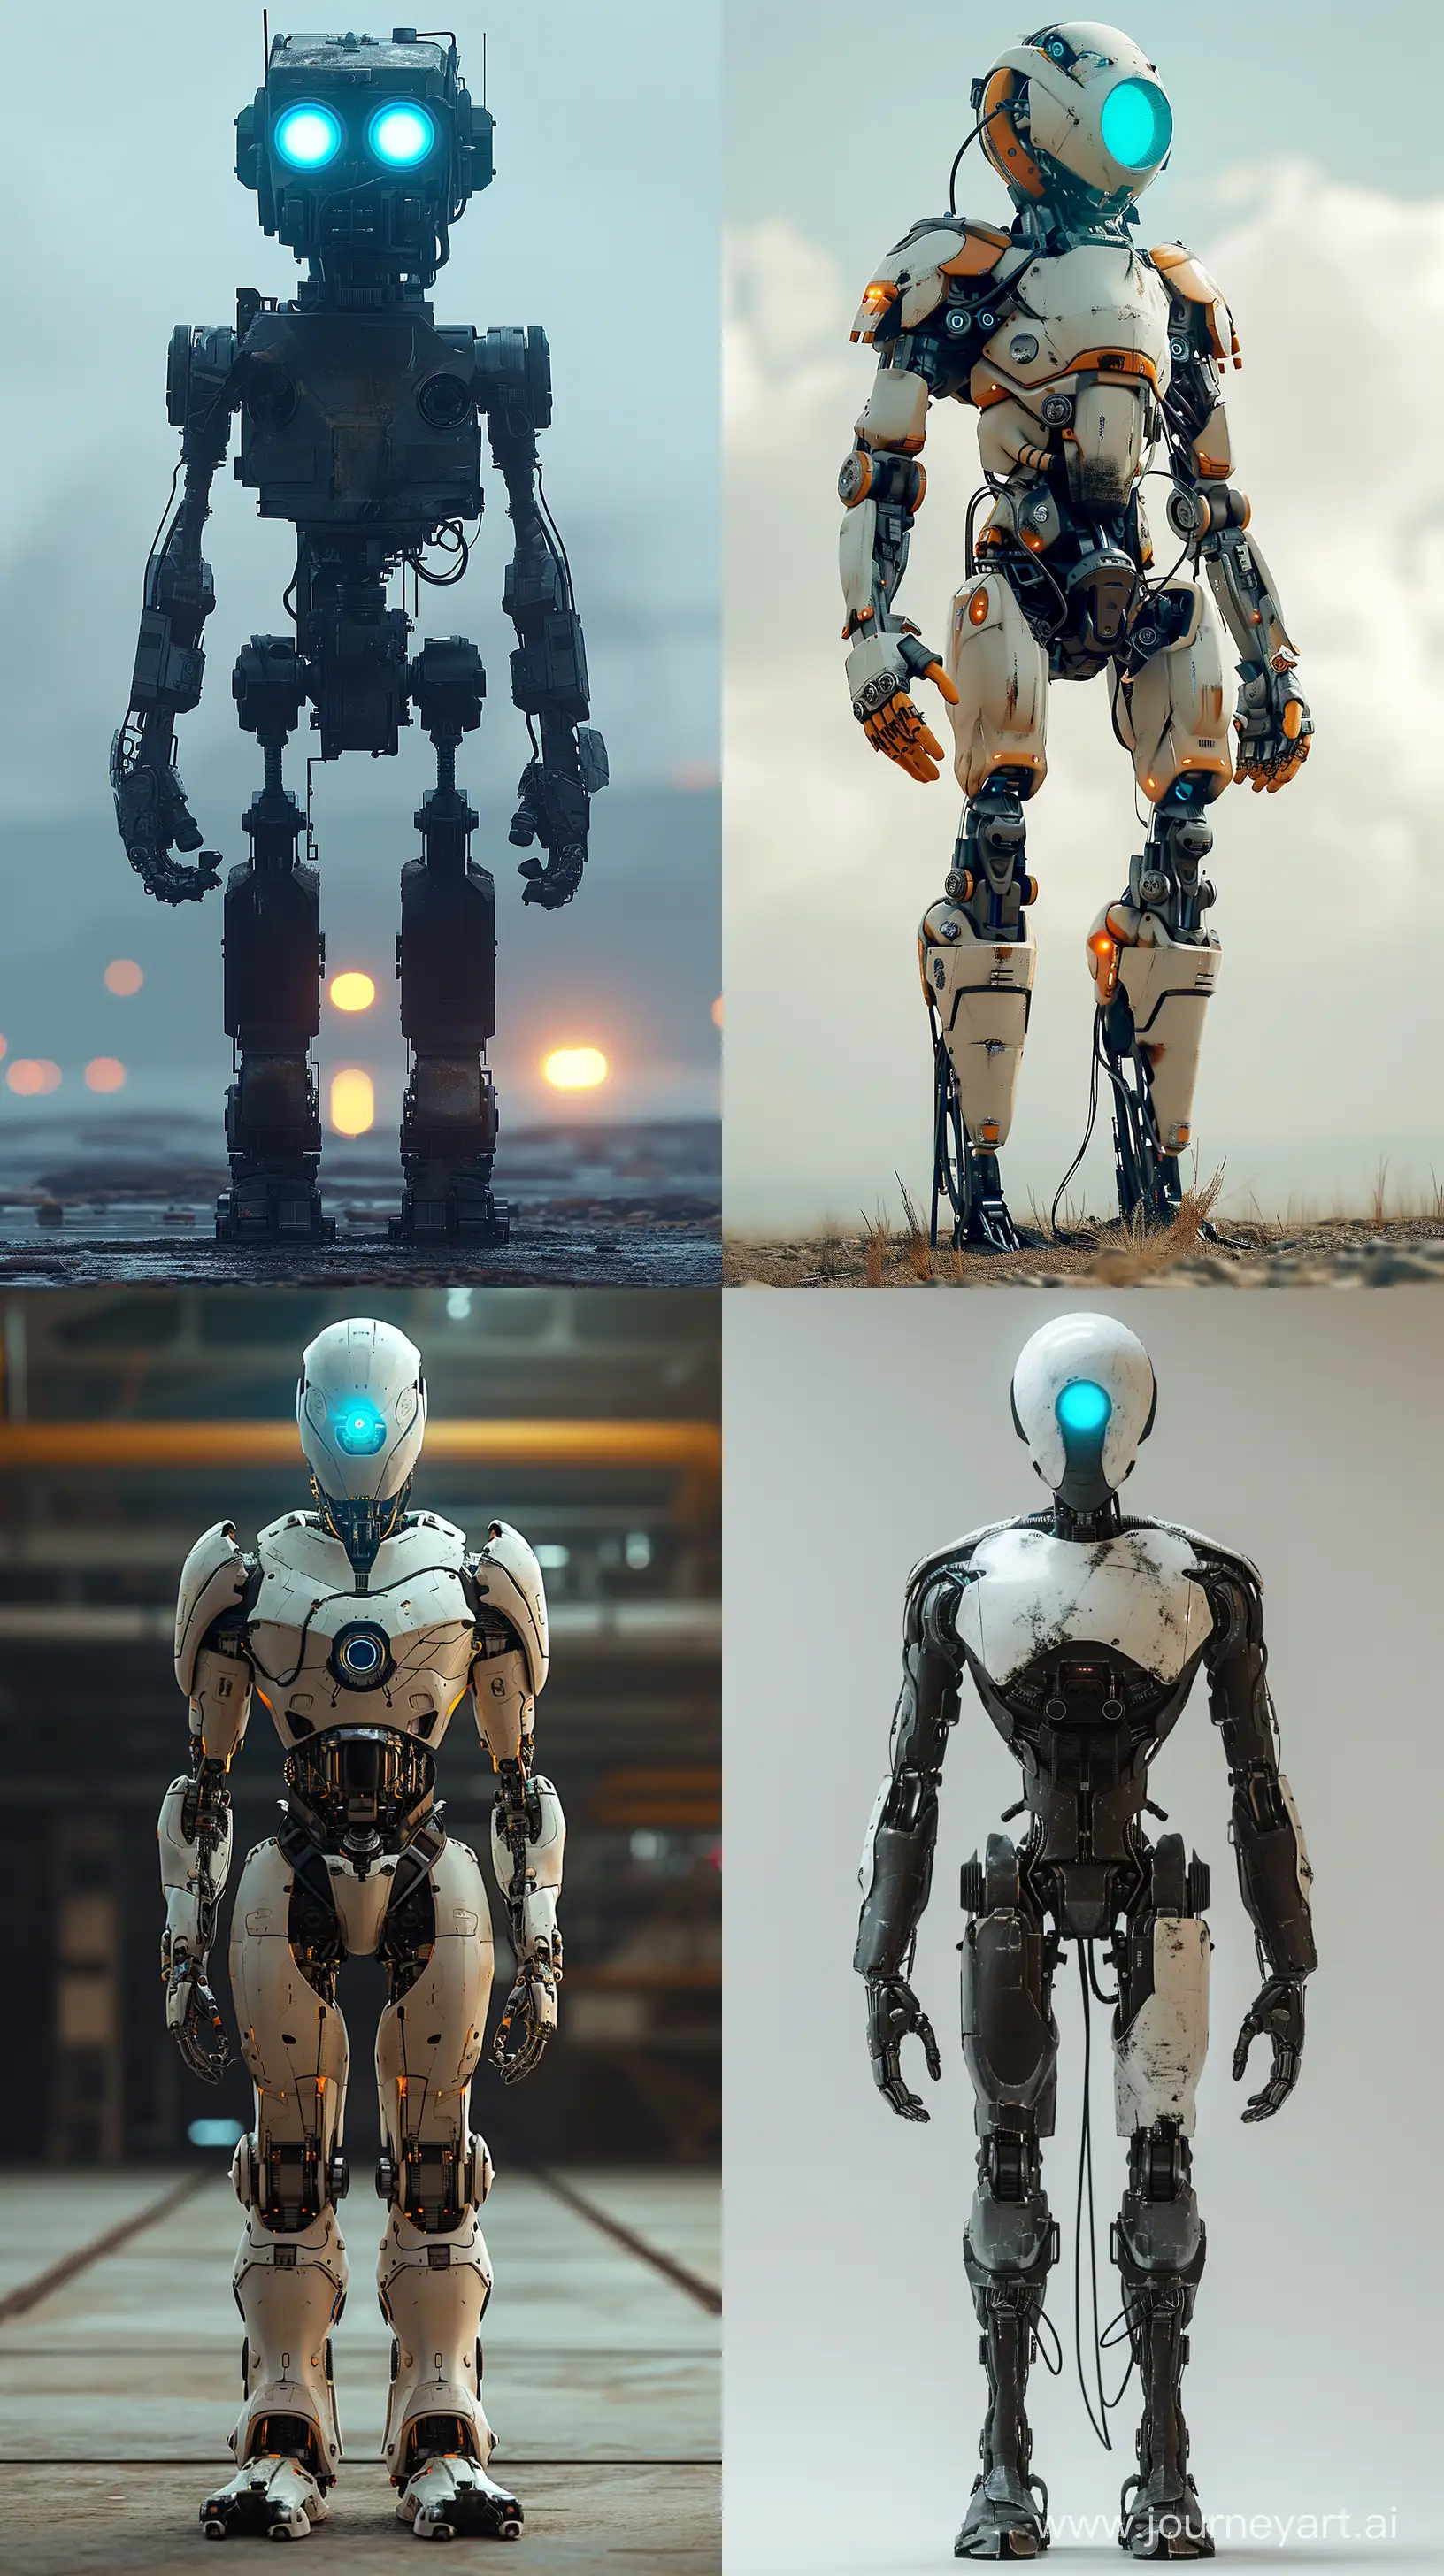 Glowing-BlueEyed-Robot-in-Captivating-Pose